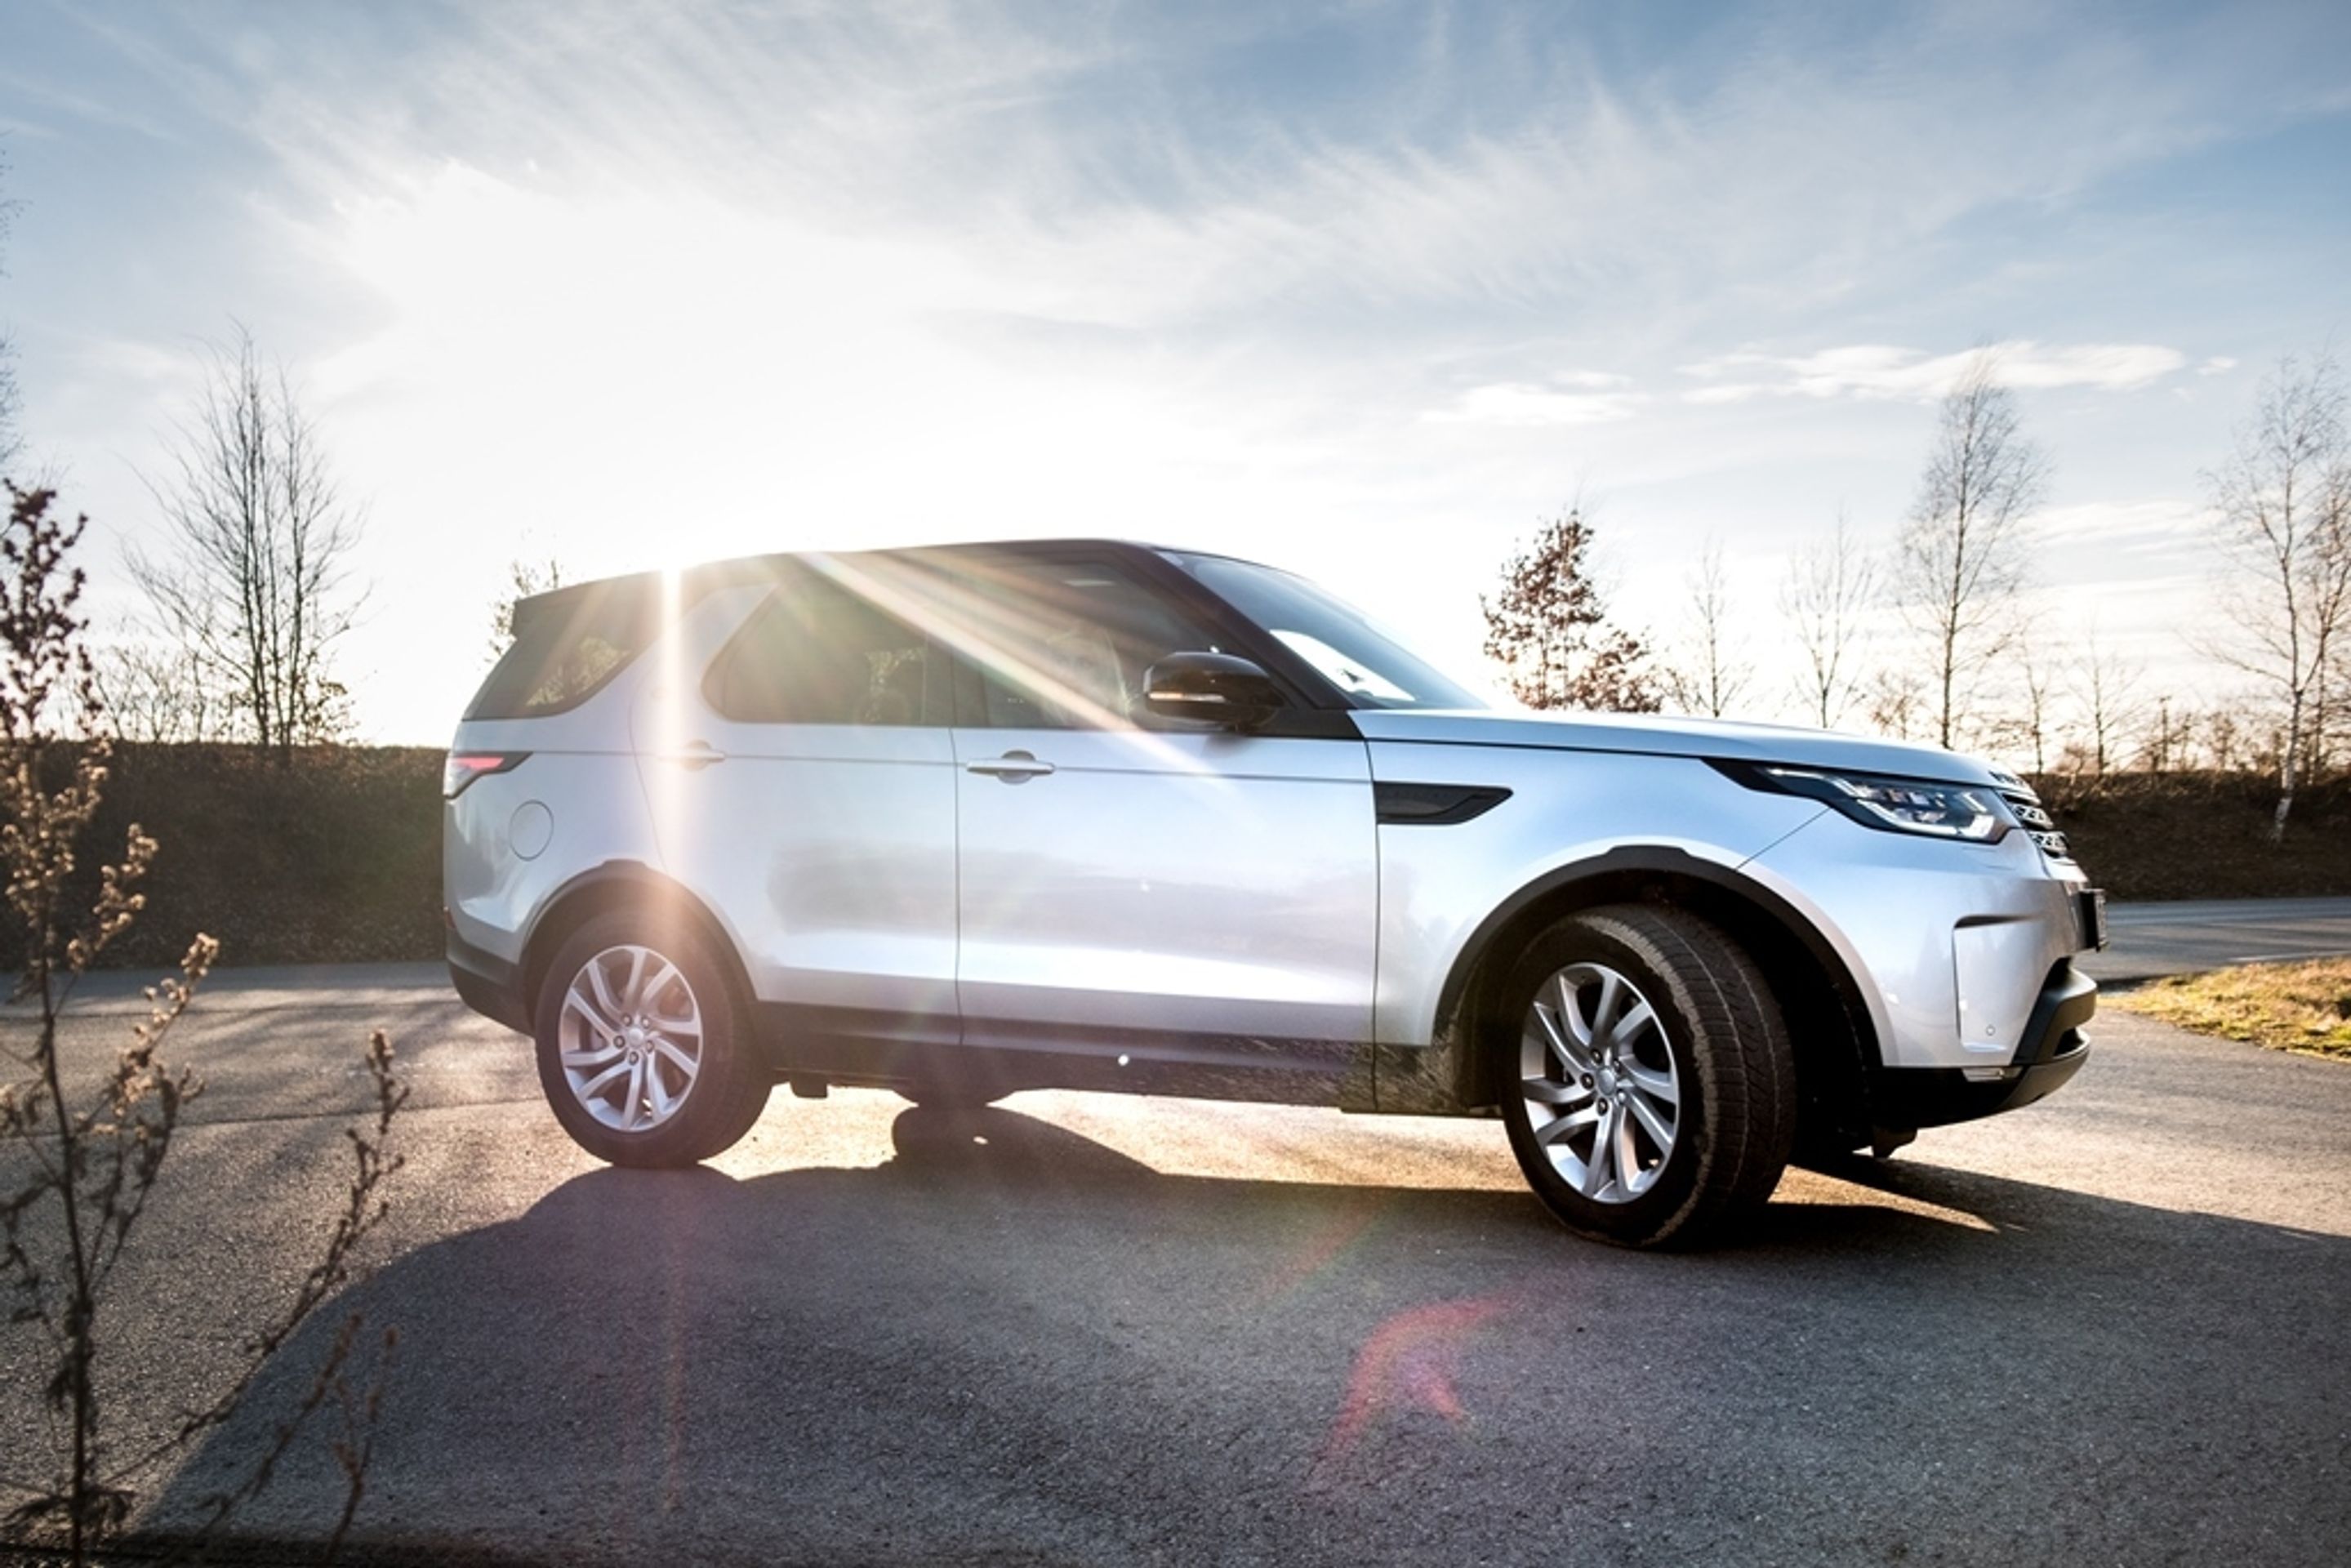 Land Rover - 6 - GALERIE: Land Rover (6/26)